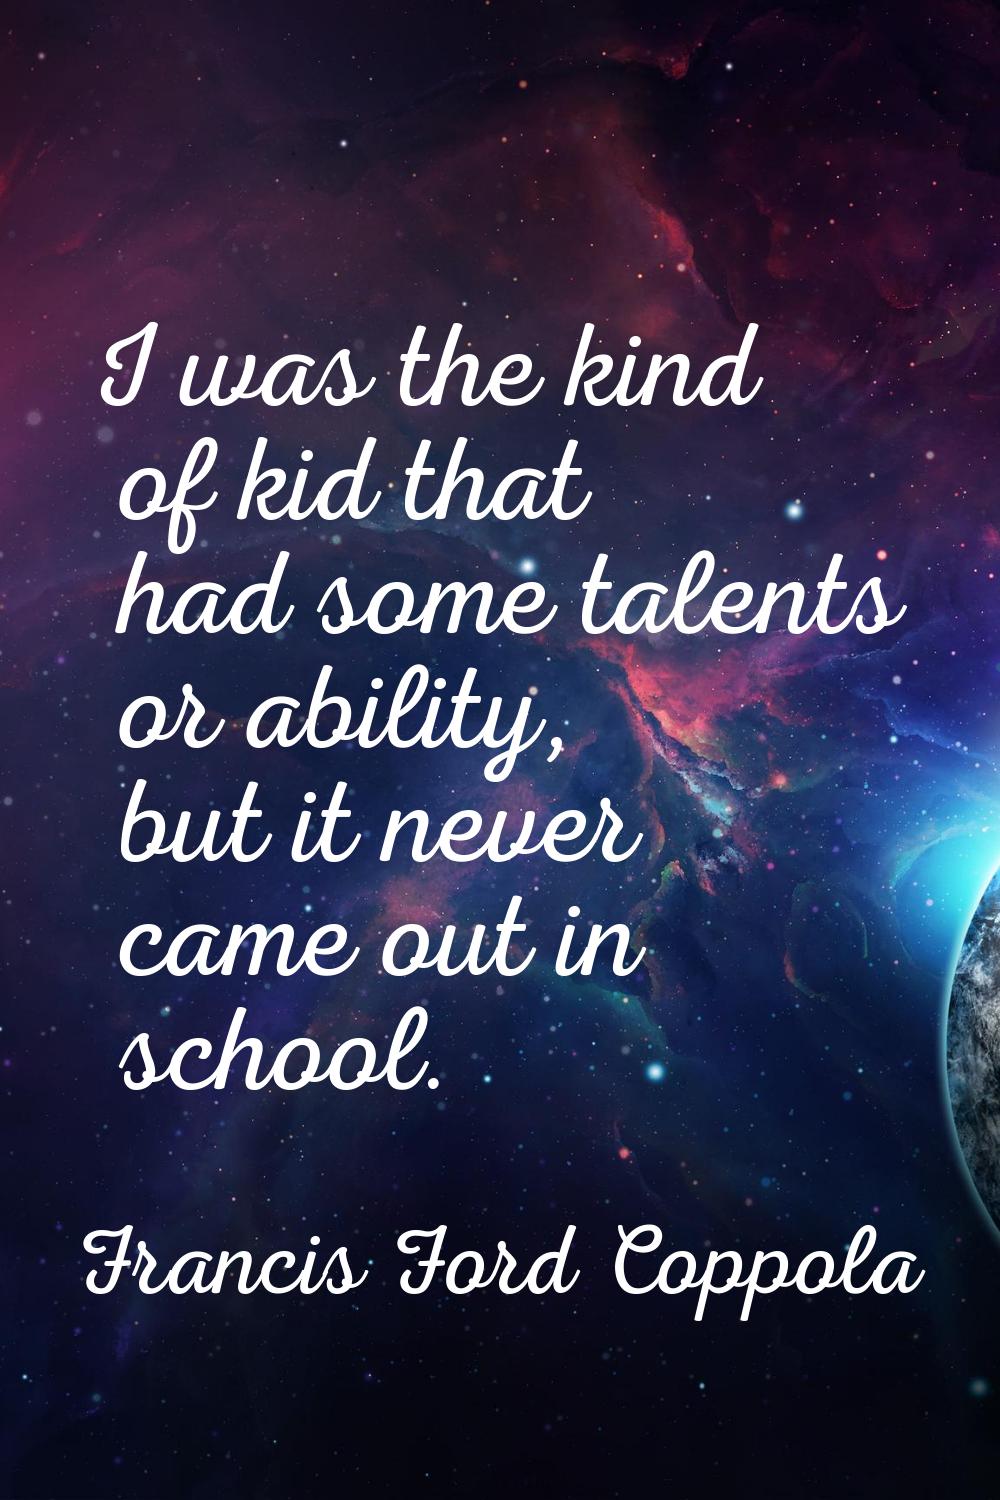 I was the kind of kid that had some talents or ability, but it never came out in school.